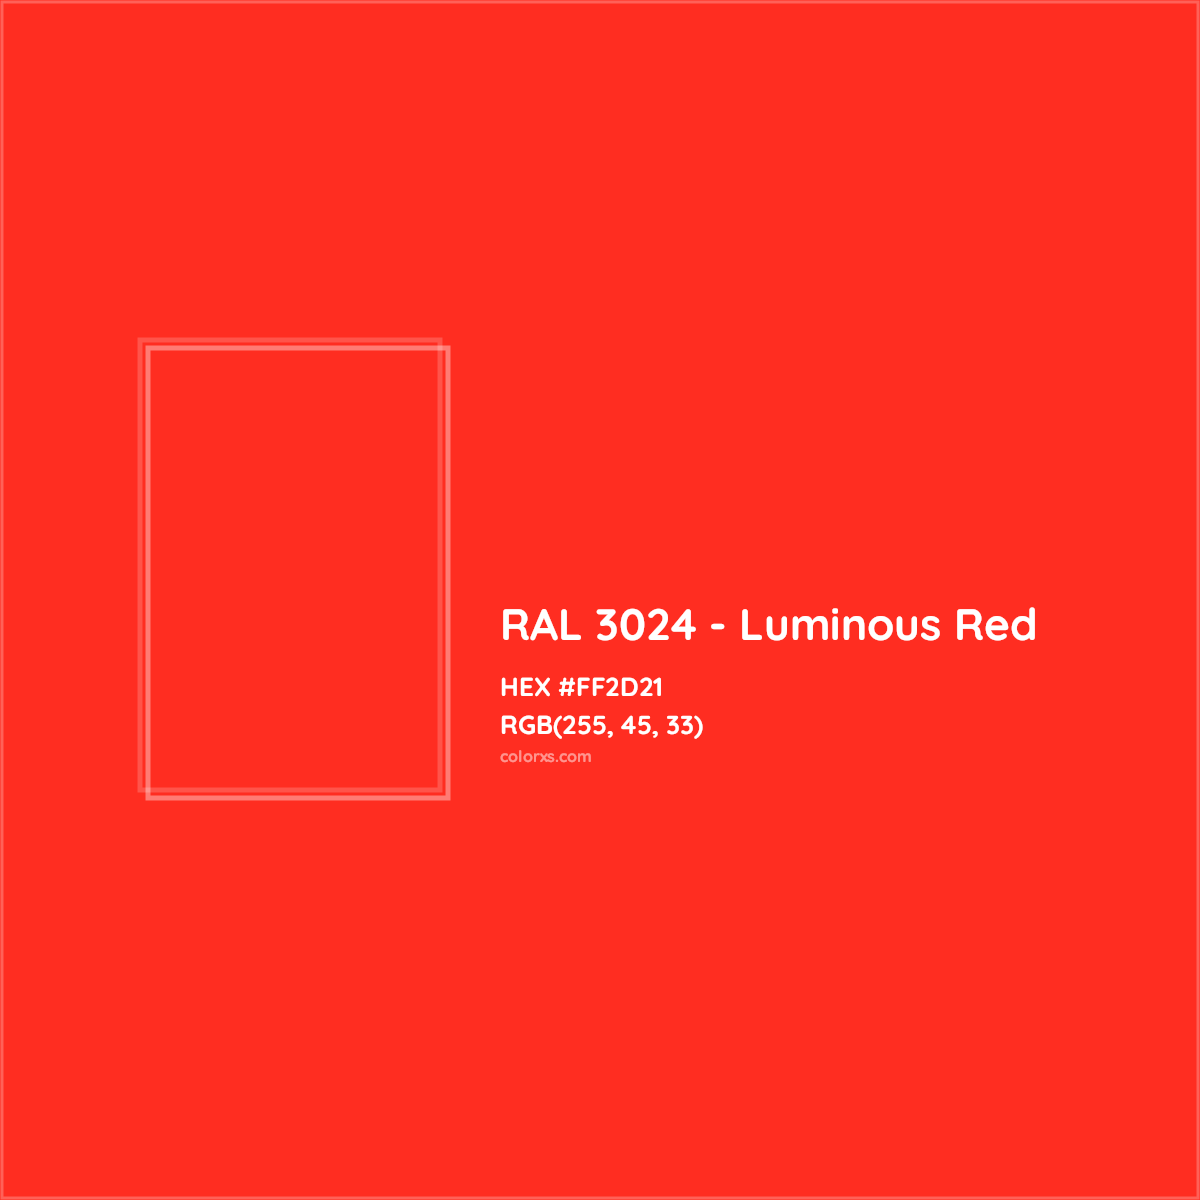 HEX #FF2D21 RAL 3024 - Luminous Red CMS RAL Classic - Color Code